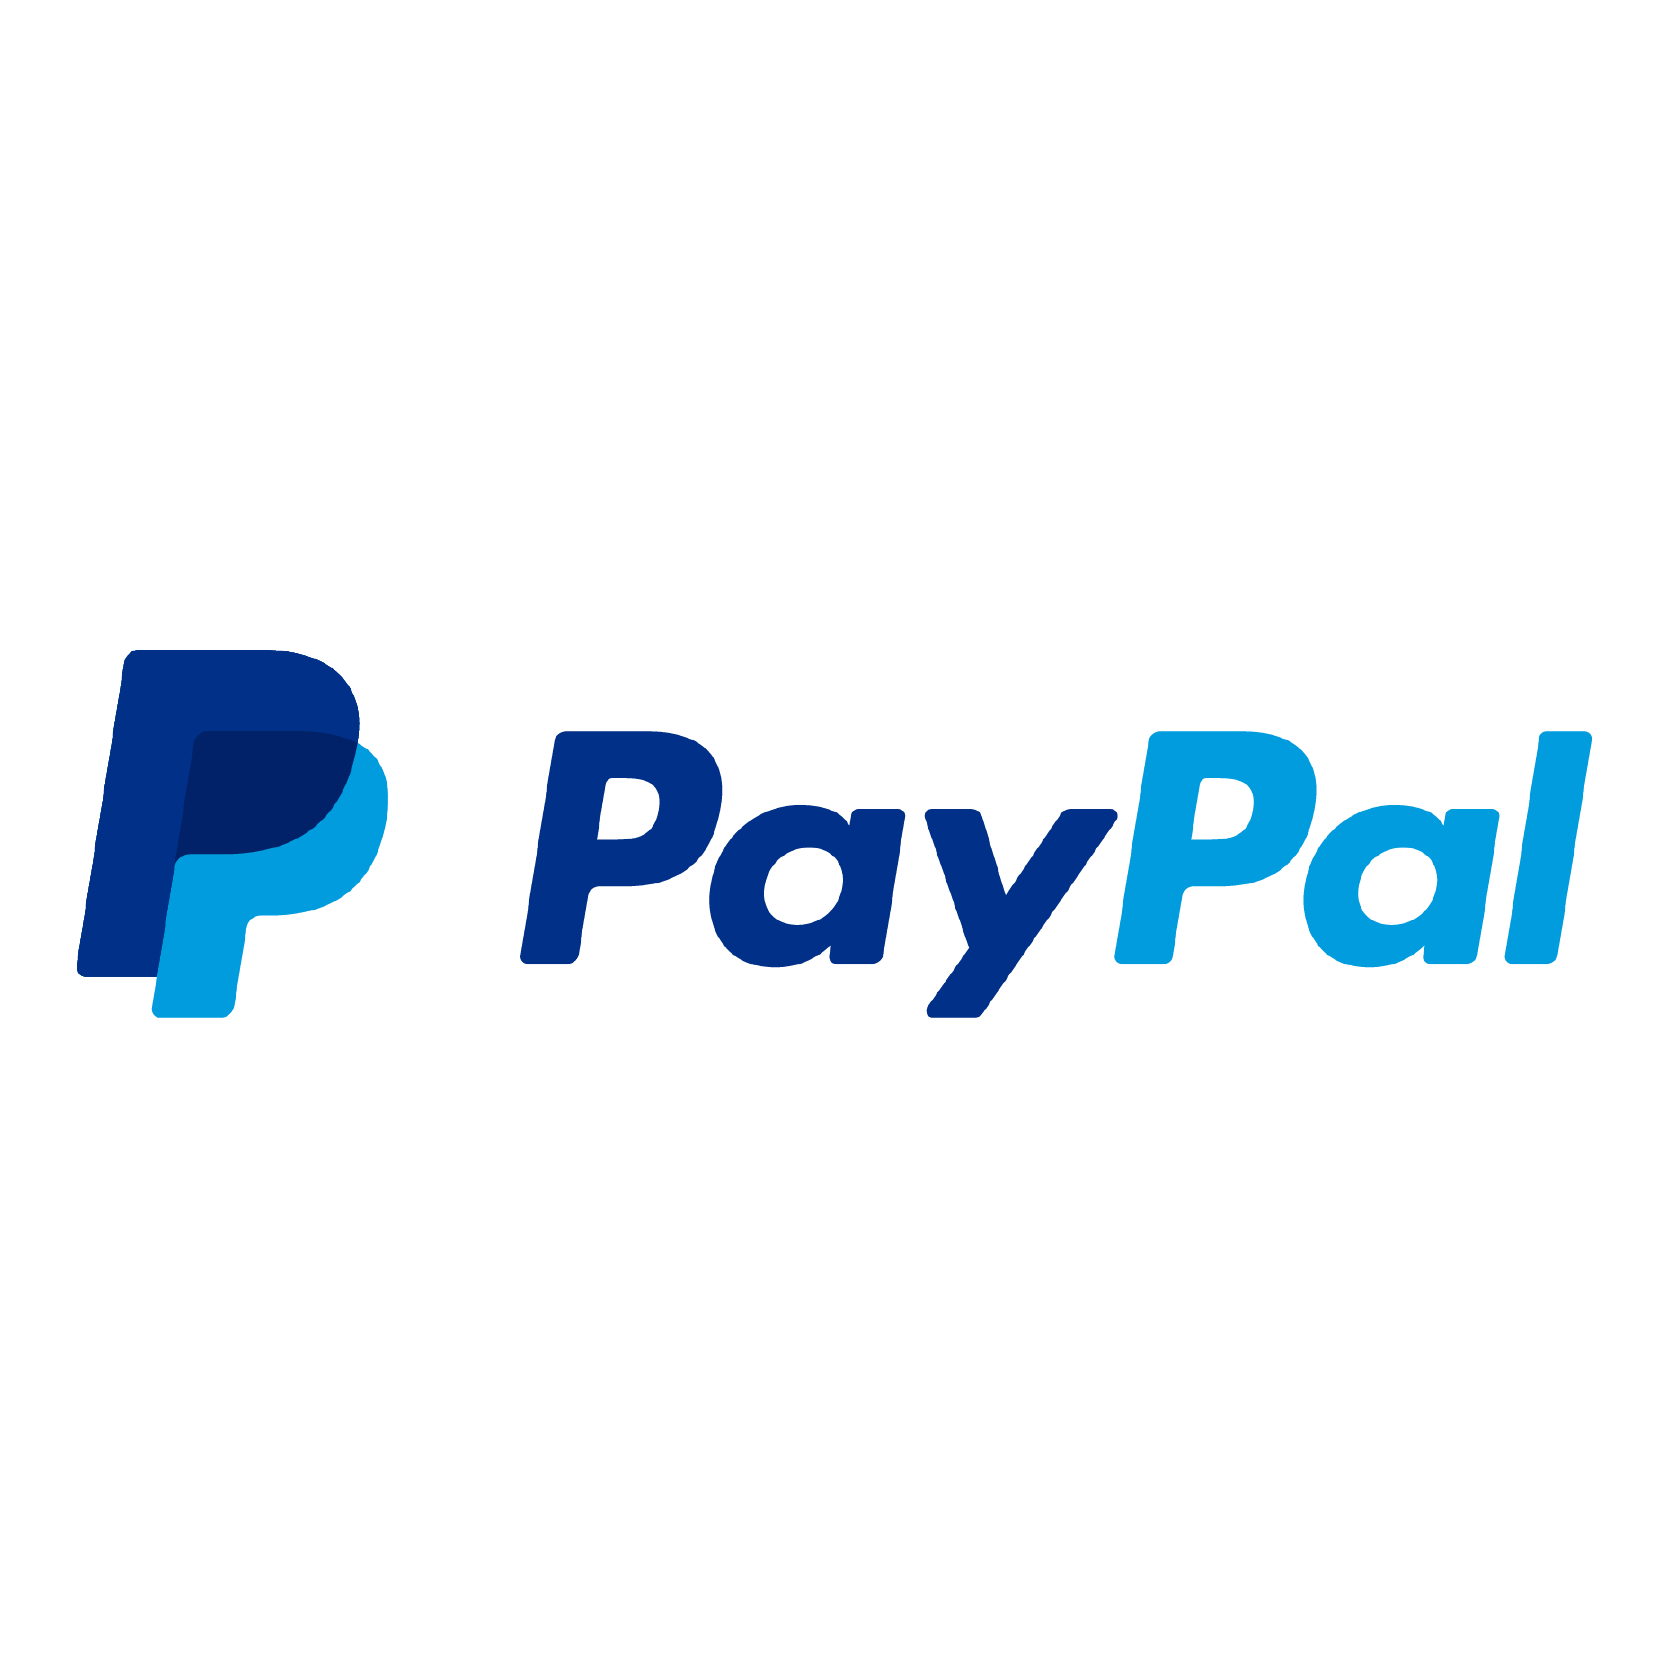 PAYPAL - PayPal Service